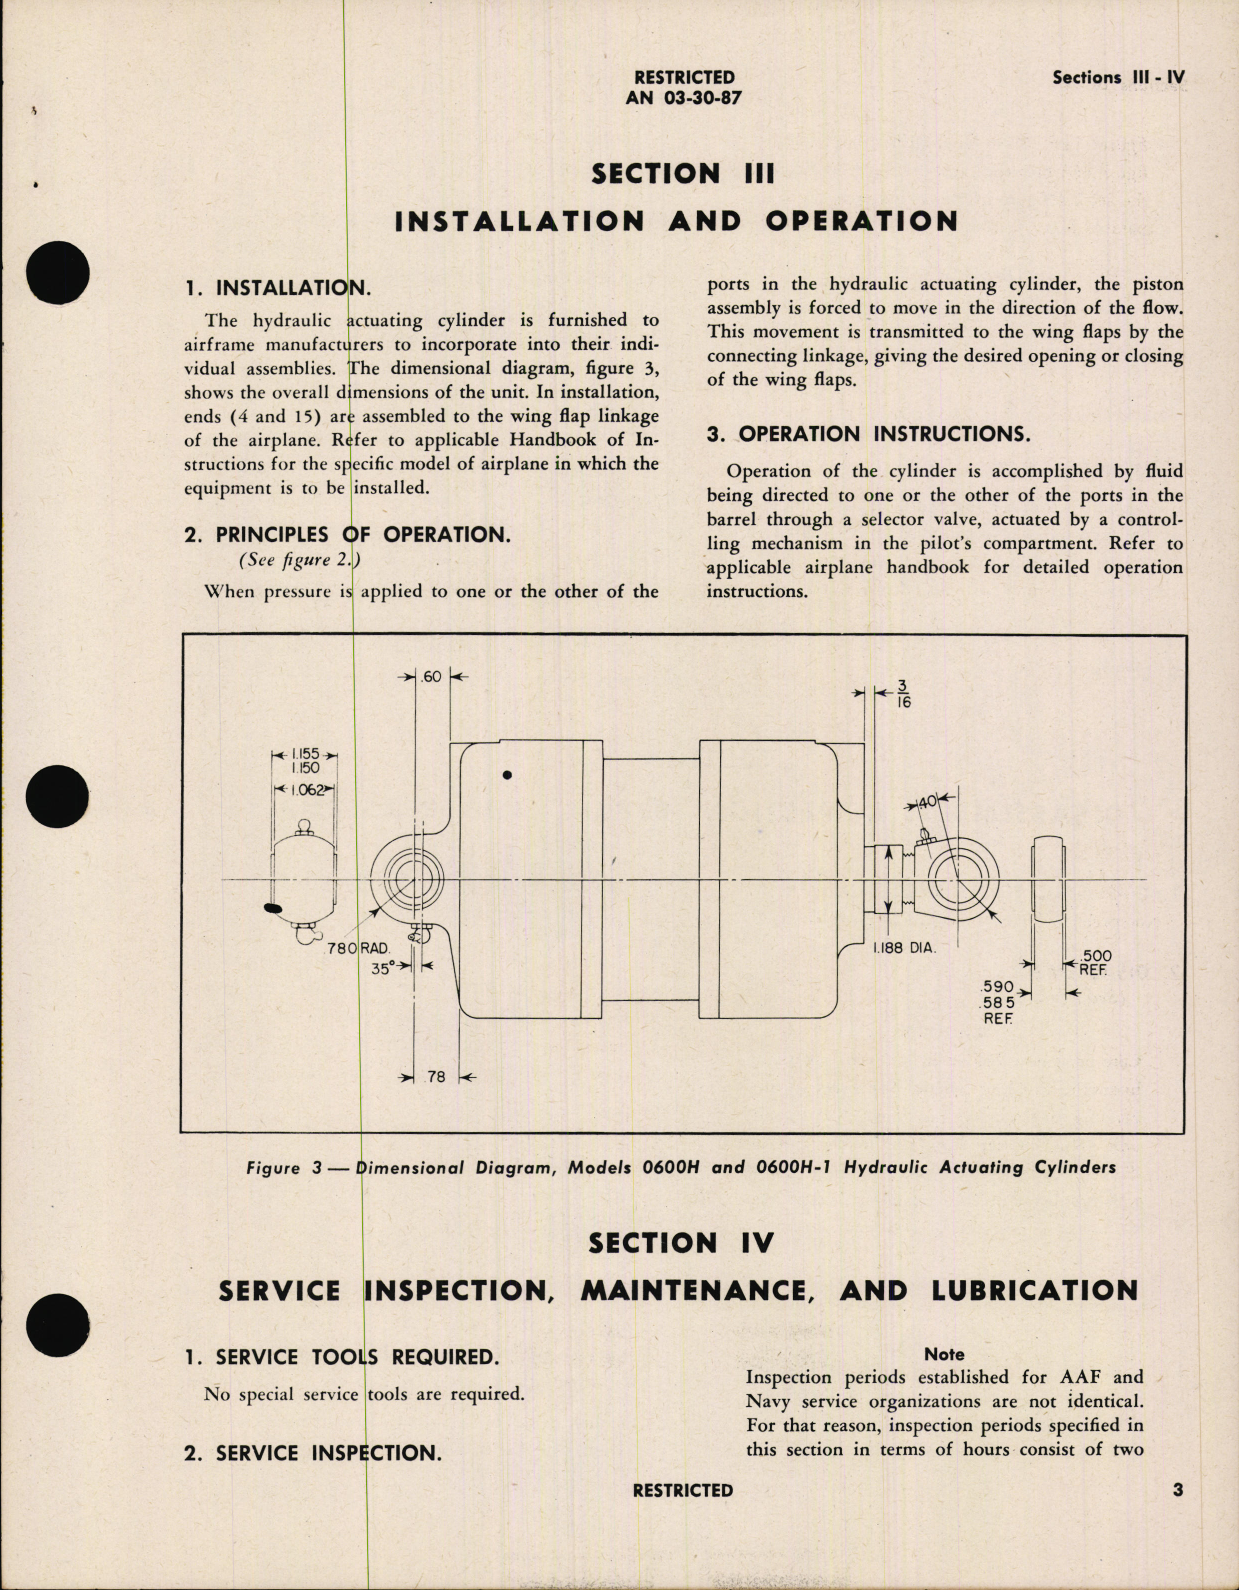 Sample page 7 from AirCorps Library document: Handbook of Instructions with Parts Catalog for Models 0600H and 0600H-1 Hydraulic Actuating Cylinders